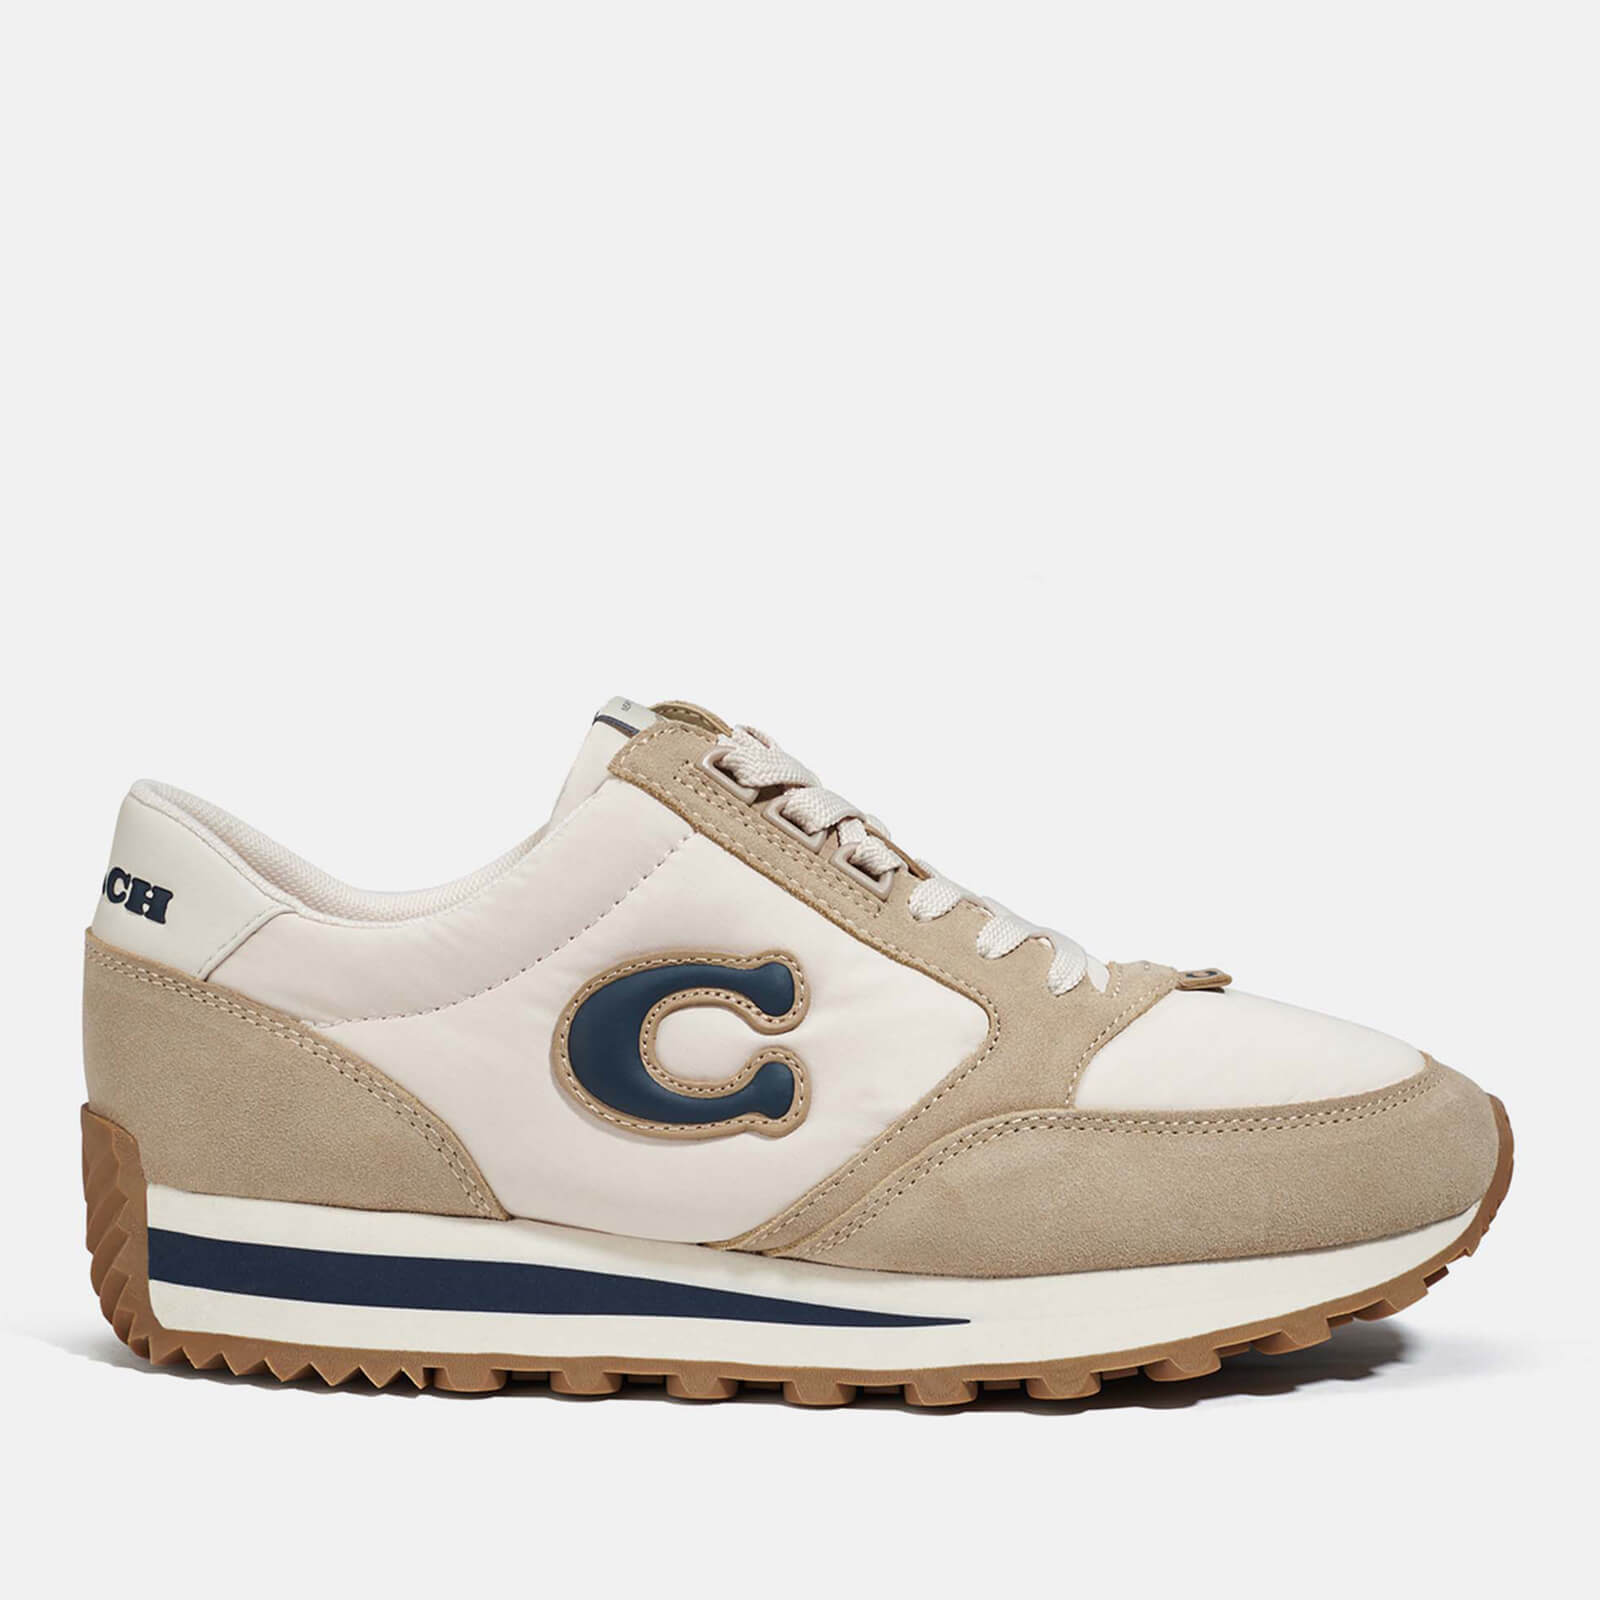 Coach Women's Suede, Shell and Leather Trainers - UK 3 von Coach